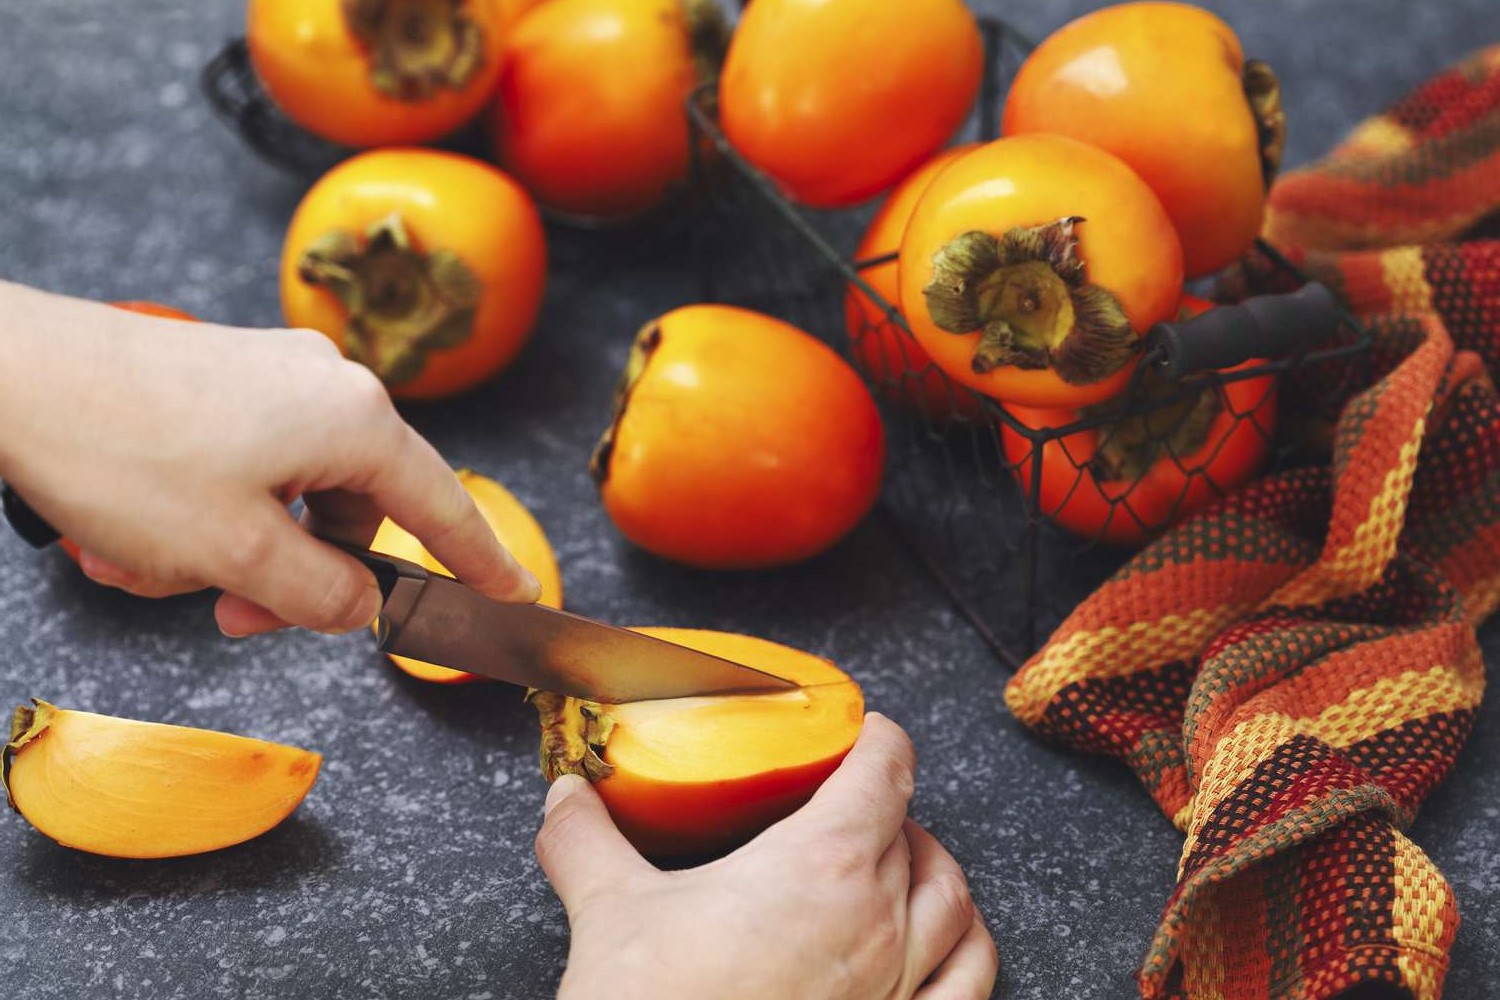 How To Eat Persimmons